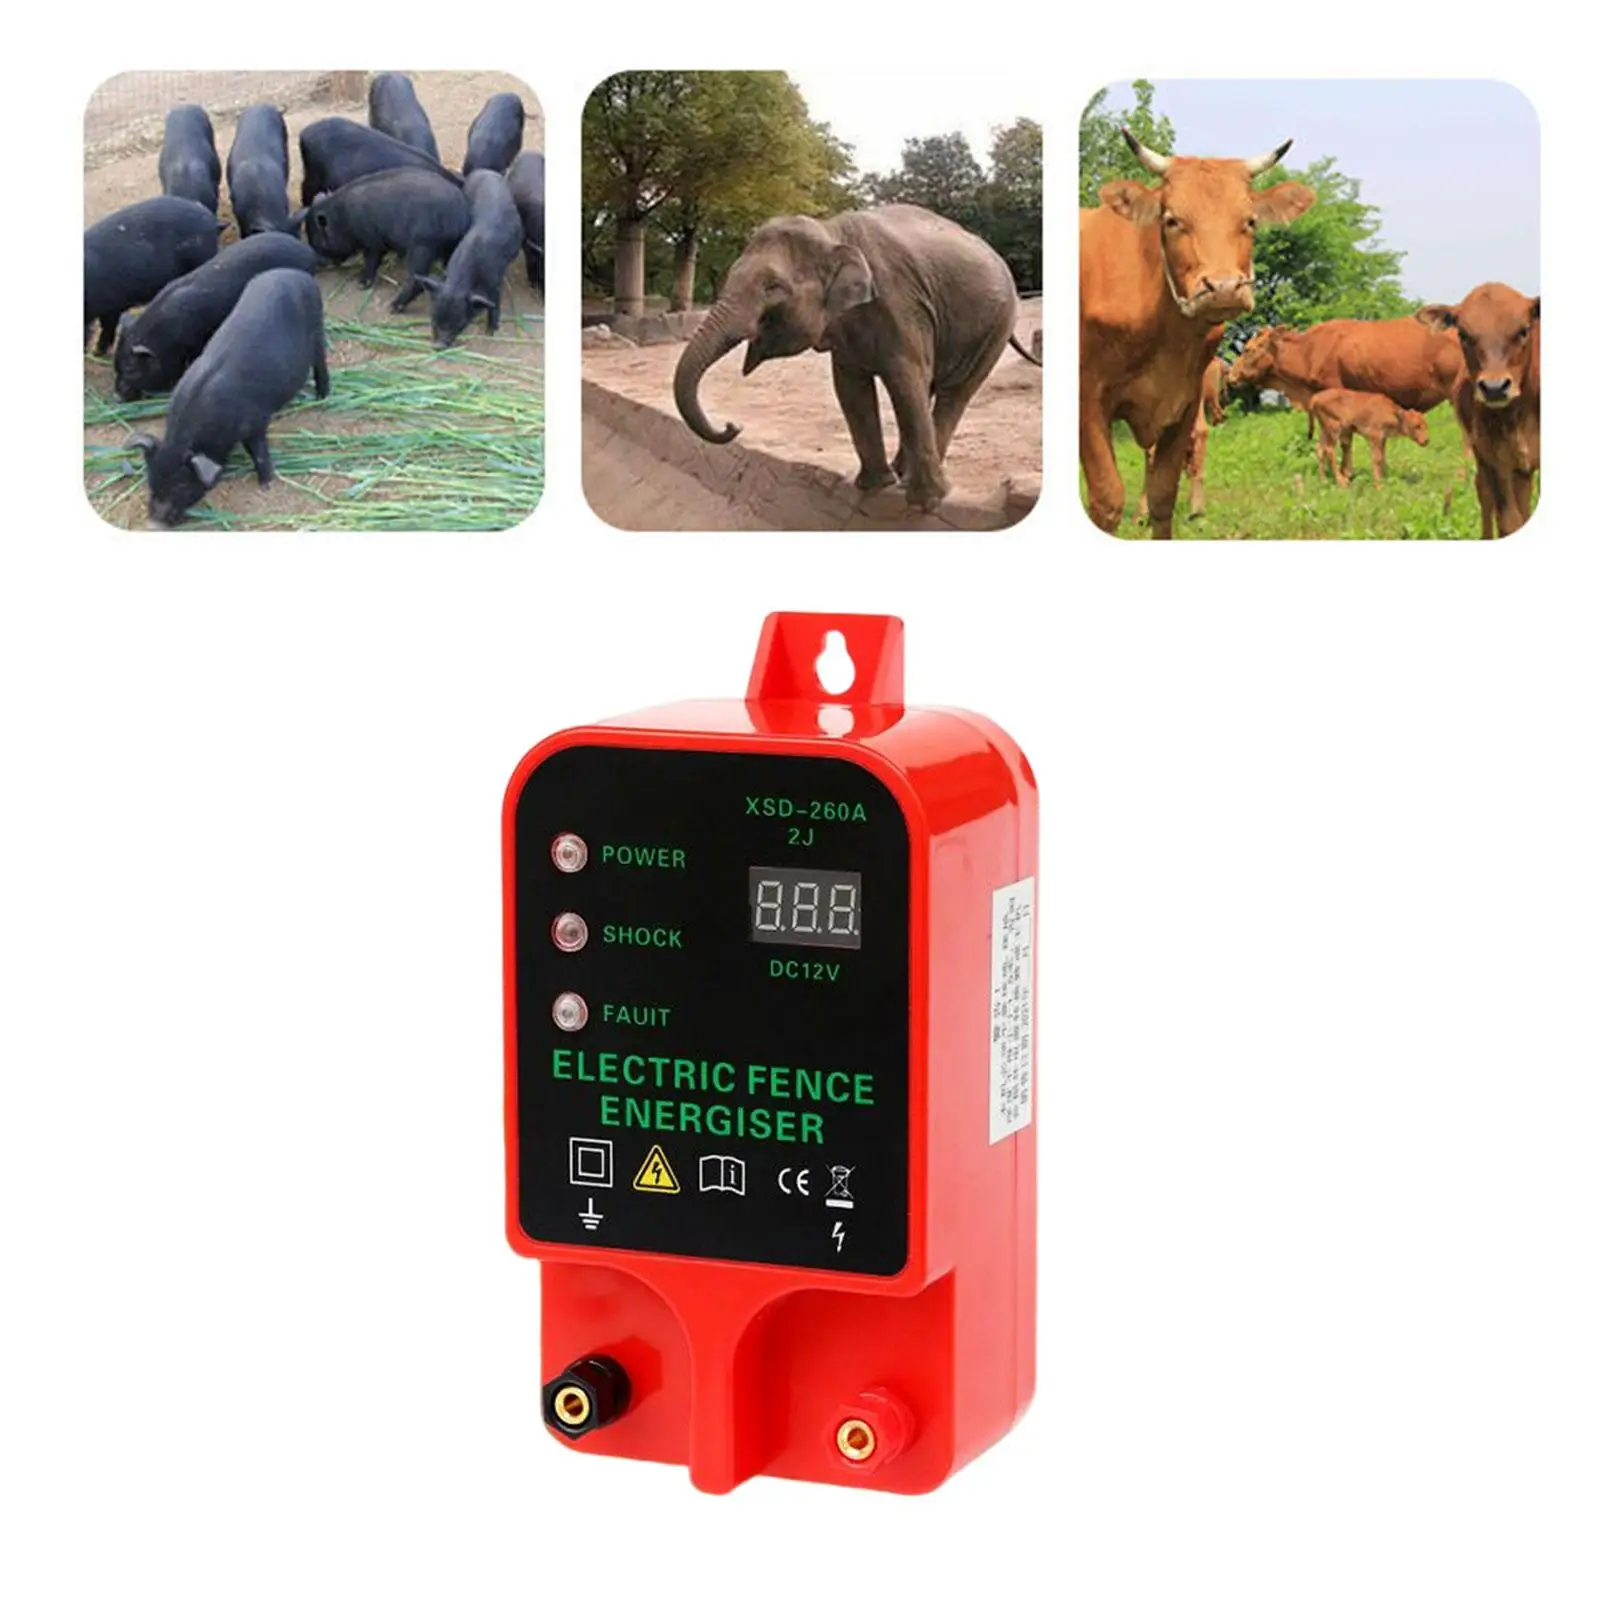 Multipurpose Electric Fence Energizer Controller Sheep Horse Cattle Fence Tool Prevent Poultry for Garden Home Lawn US